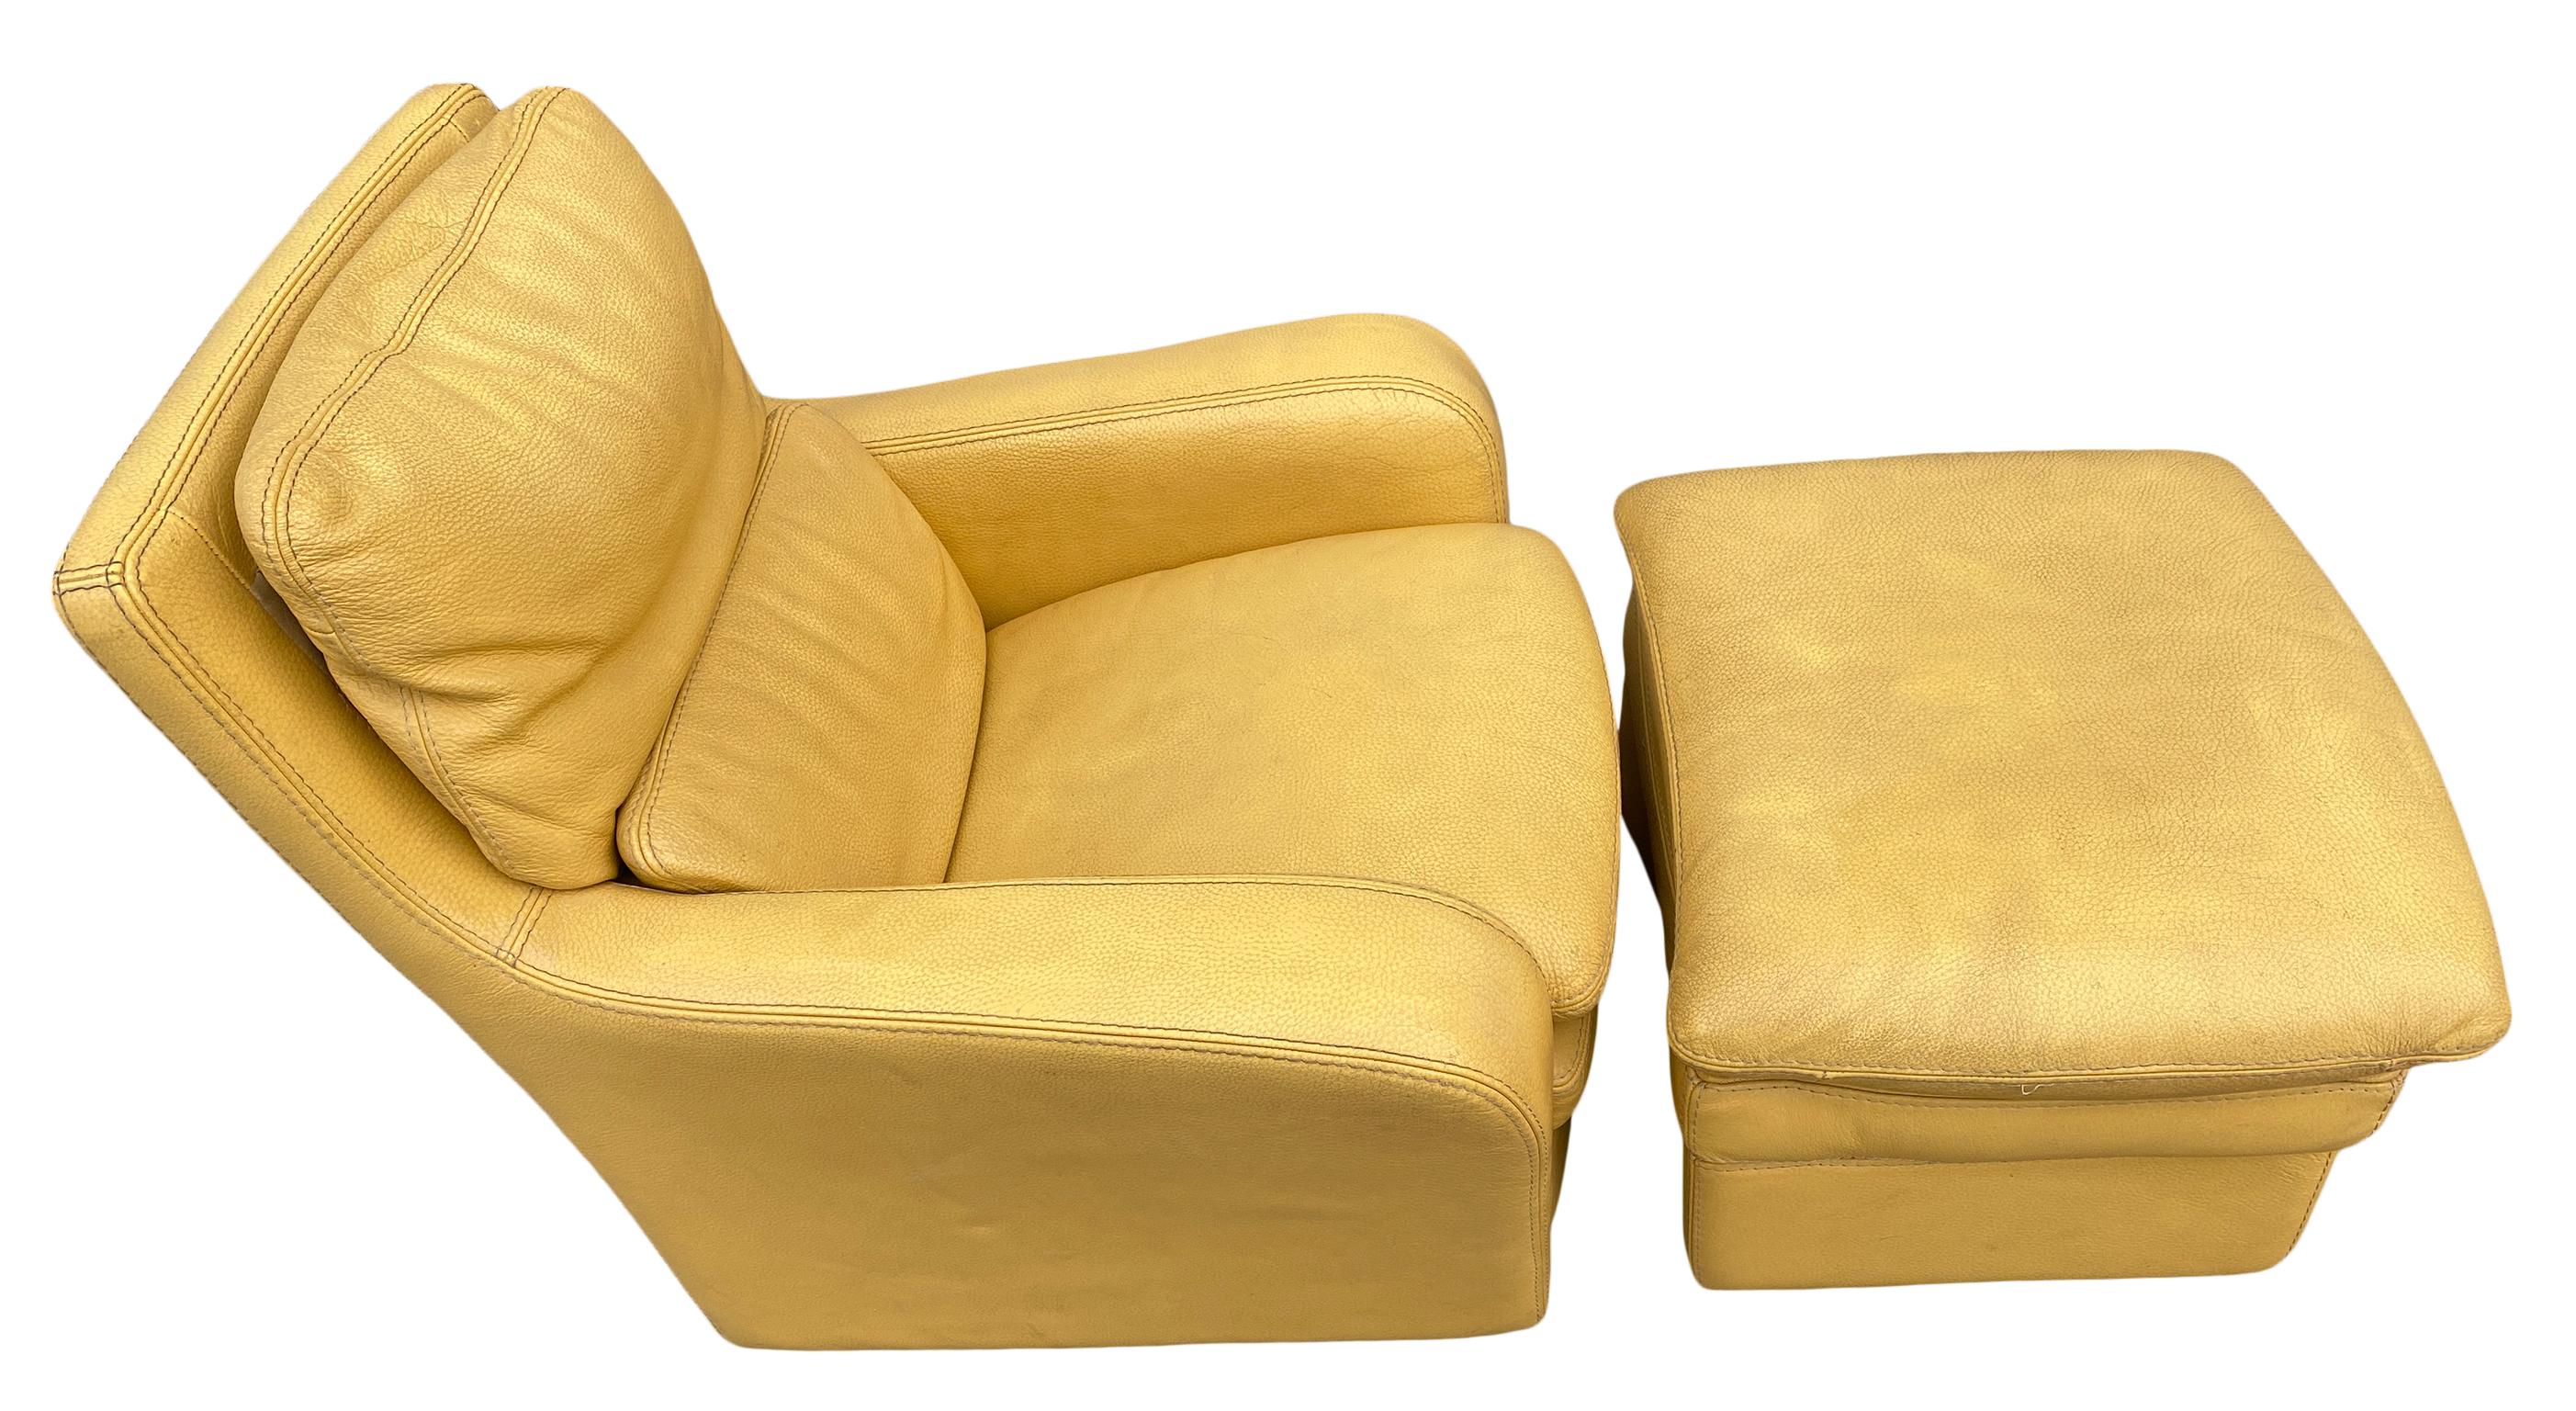 Modern Italian yellow leather lounge chair by Roche Bobois with ottoman. Great lounge chair and ottoman with rare yellow leather. This Lounge is all original vintage condition with lots of beautiful Patina use wear to the leather cushions as seen in